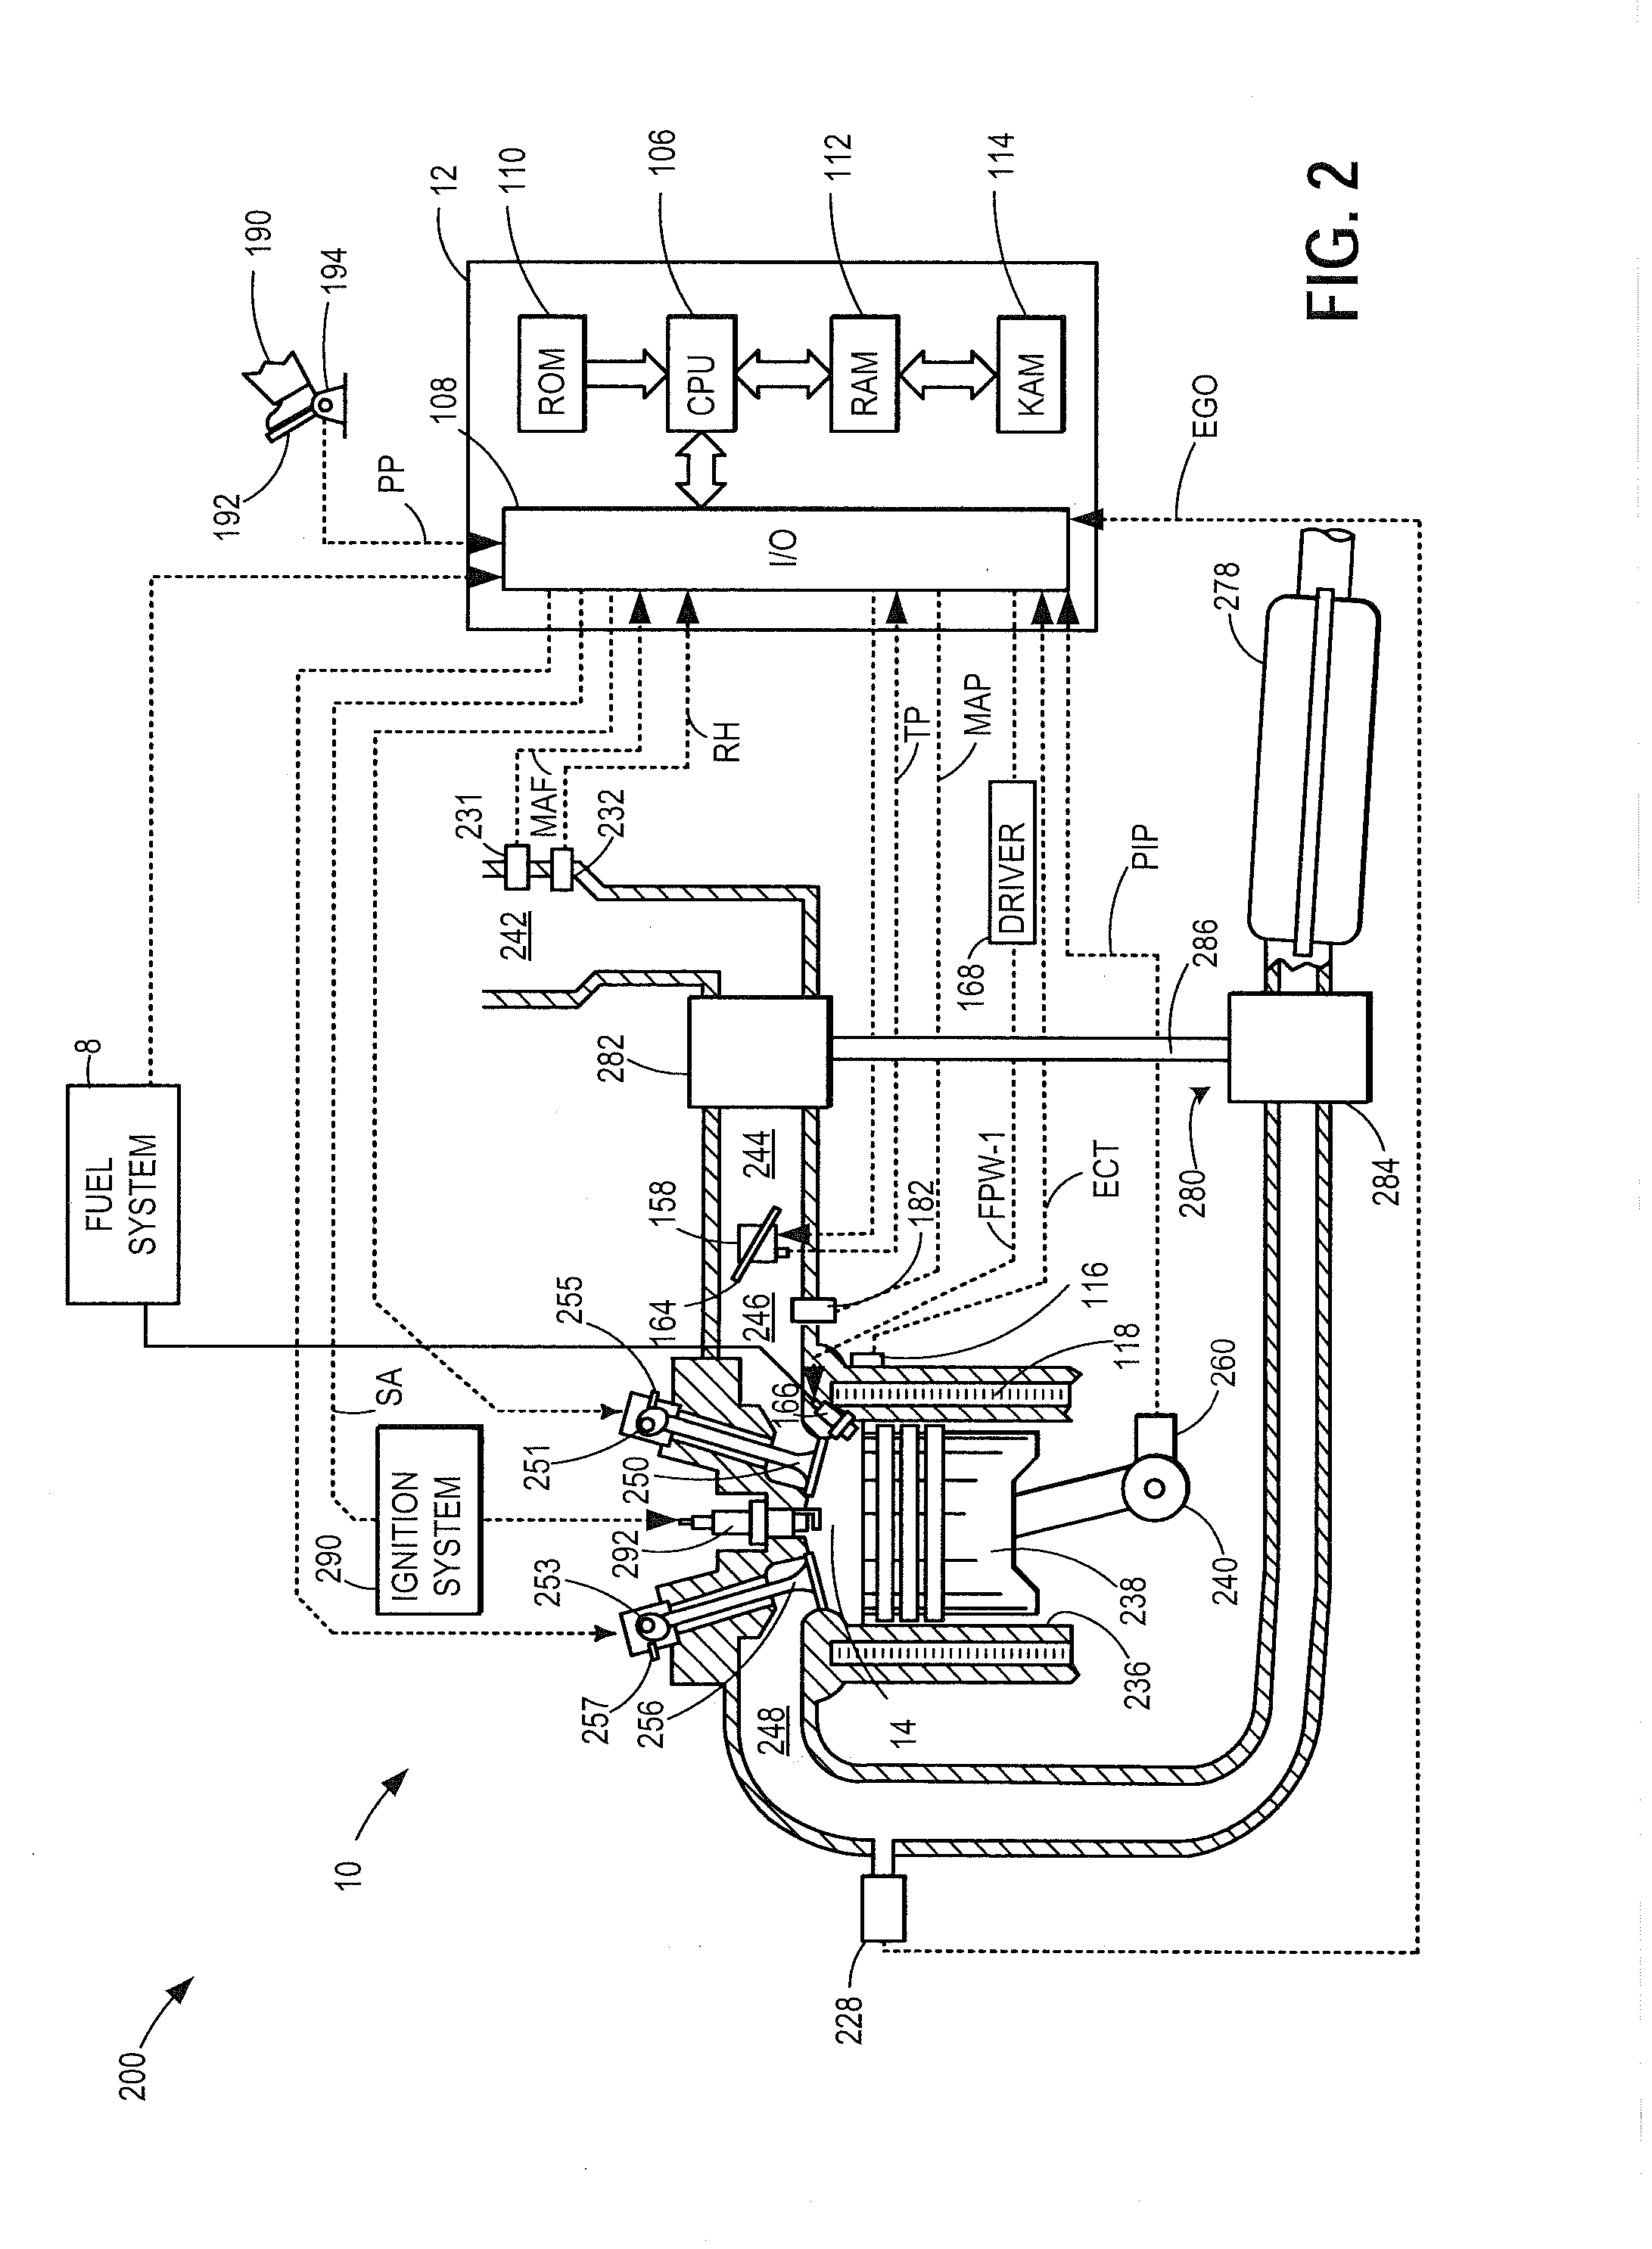 Method and system for an intake humidity sensor